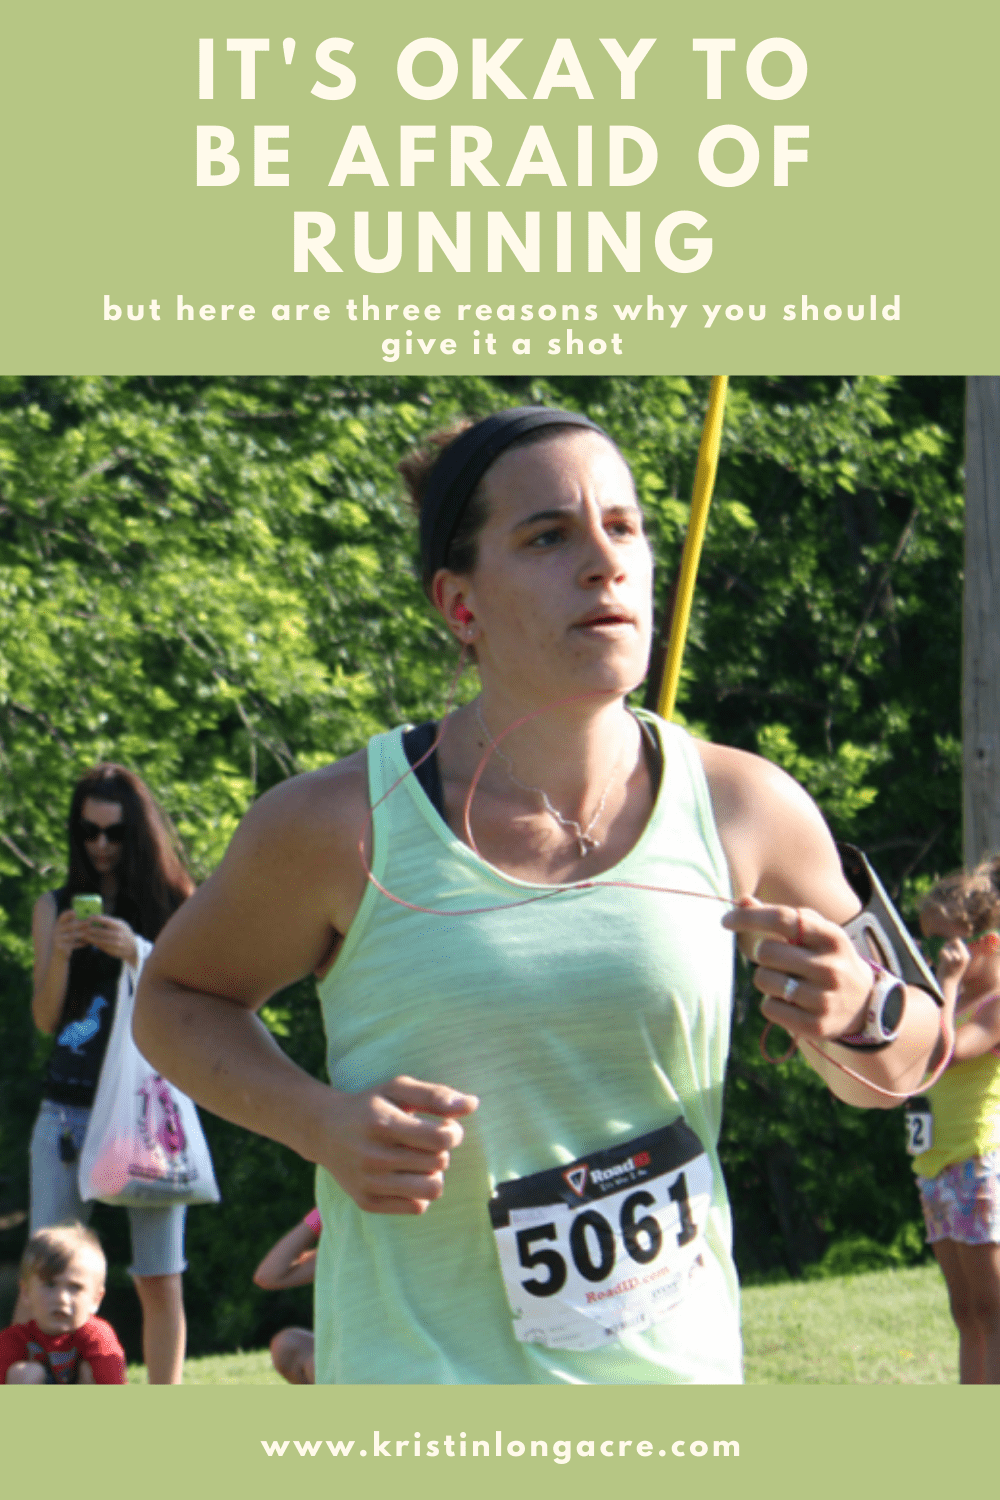 It's Okay to be afraid of running